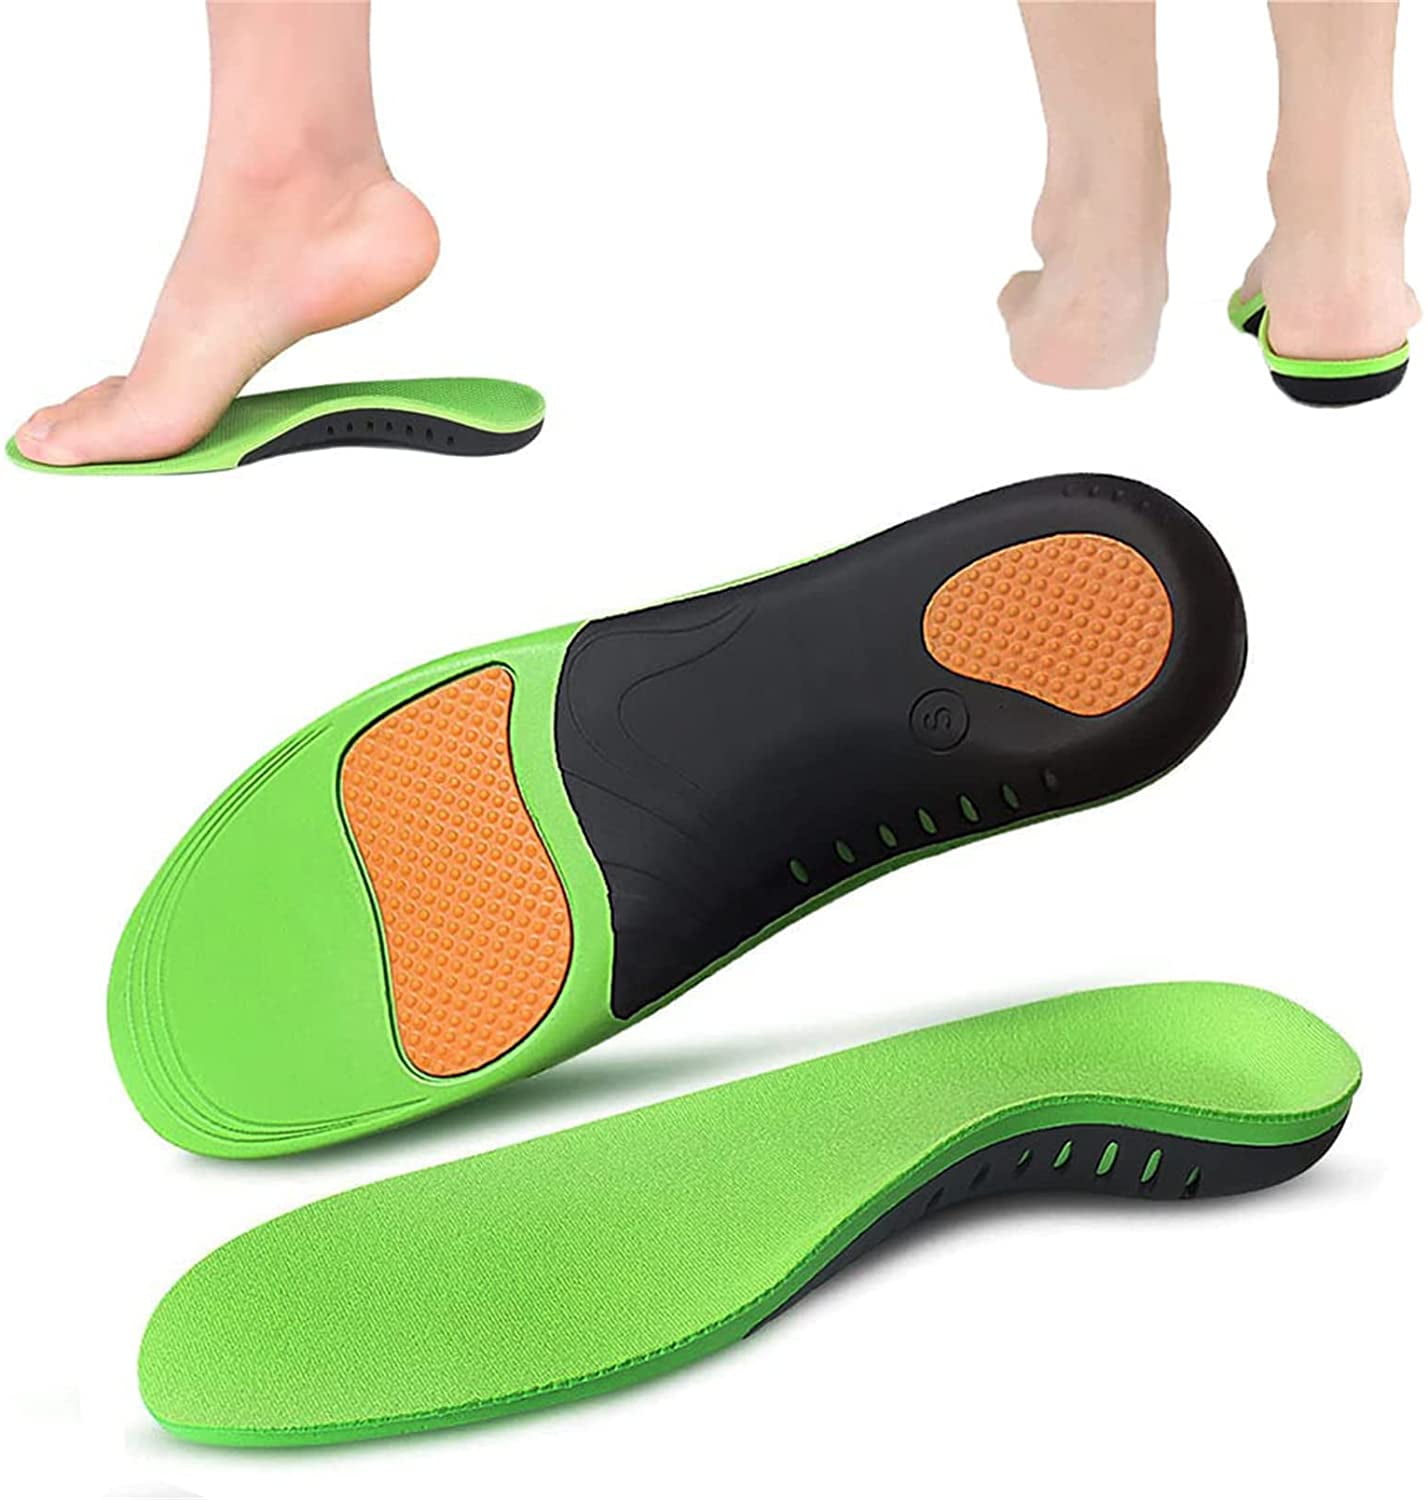 Disgrace Crust tent Insoles Insoles for Men Work Boots Women, Orthotic Shoe Inserts Relieve  Plantar Fasciitis, High Arch Support Shoe Insoles - Walmart.com